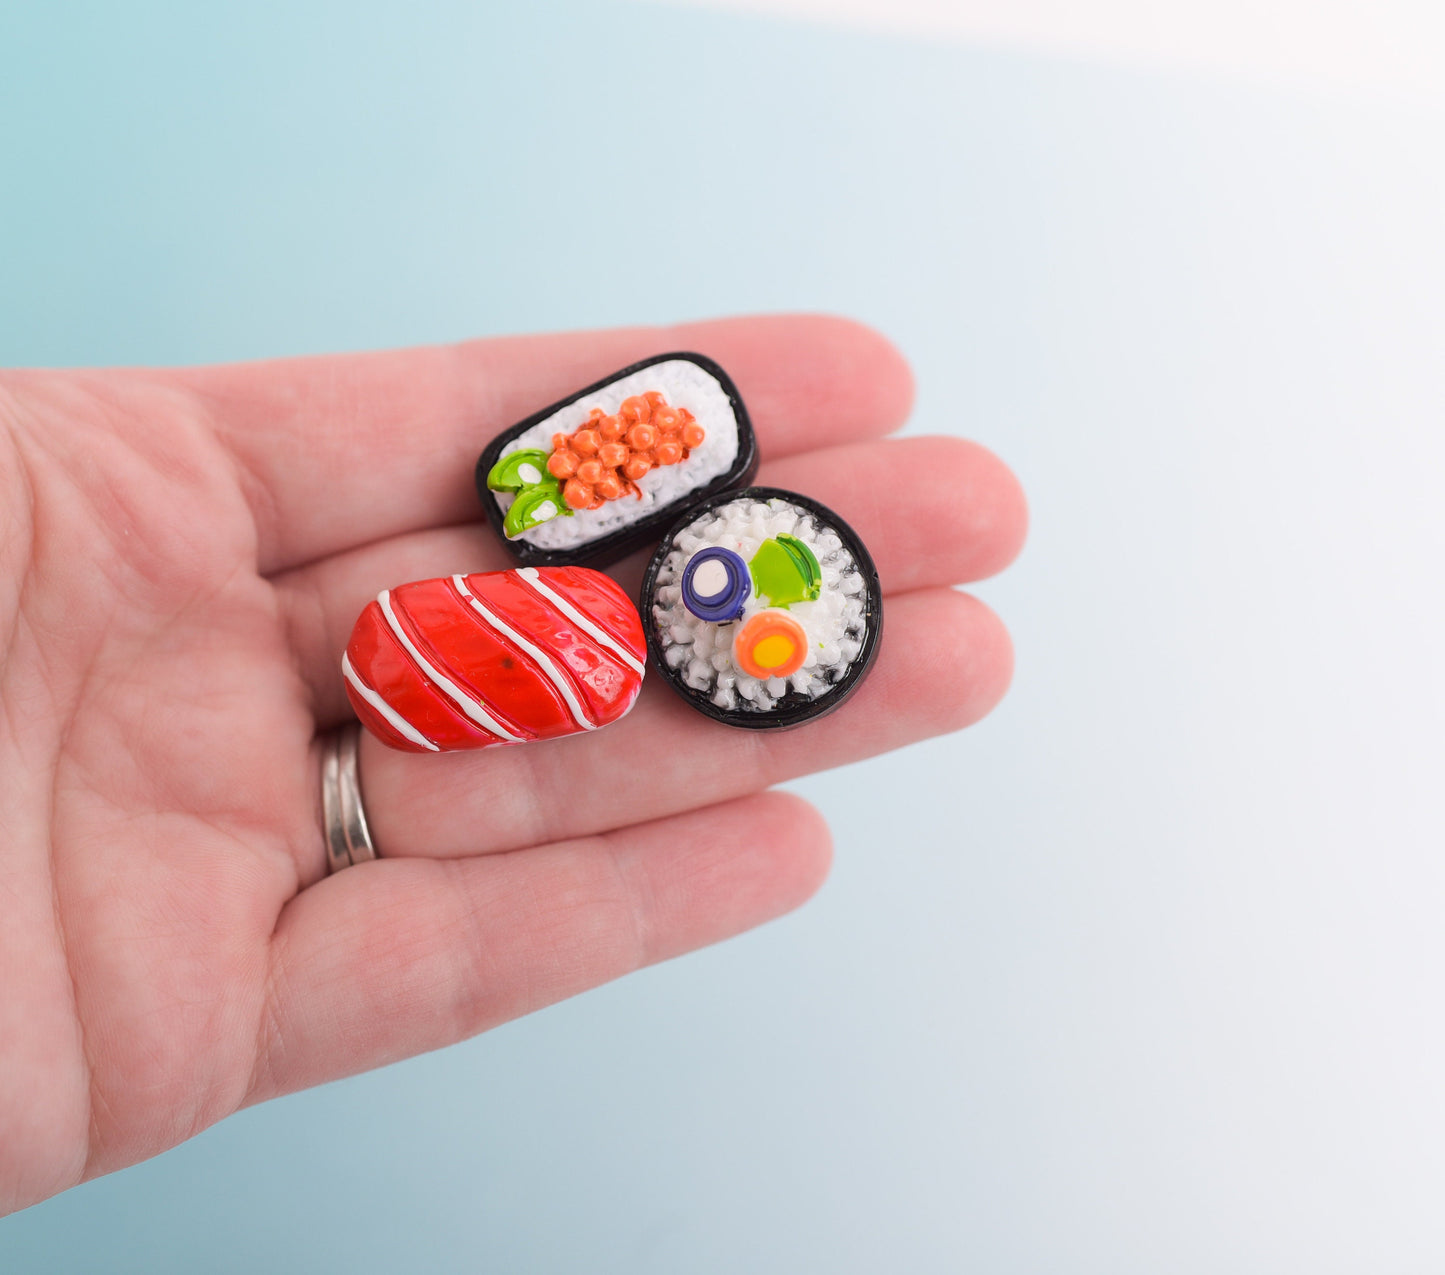 Sushi Push Pins or Magnets- Set of 10